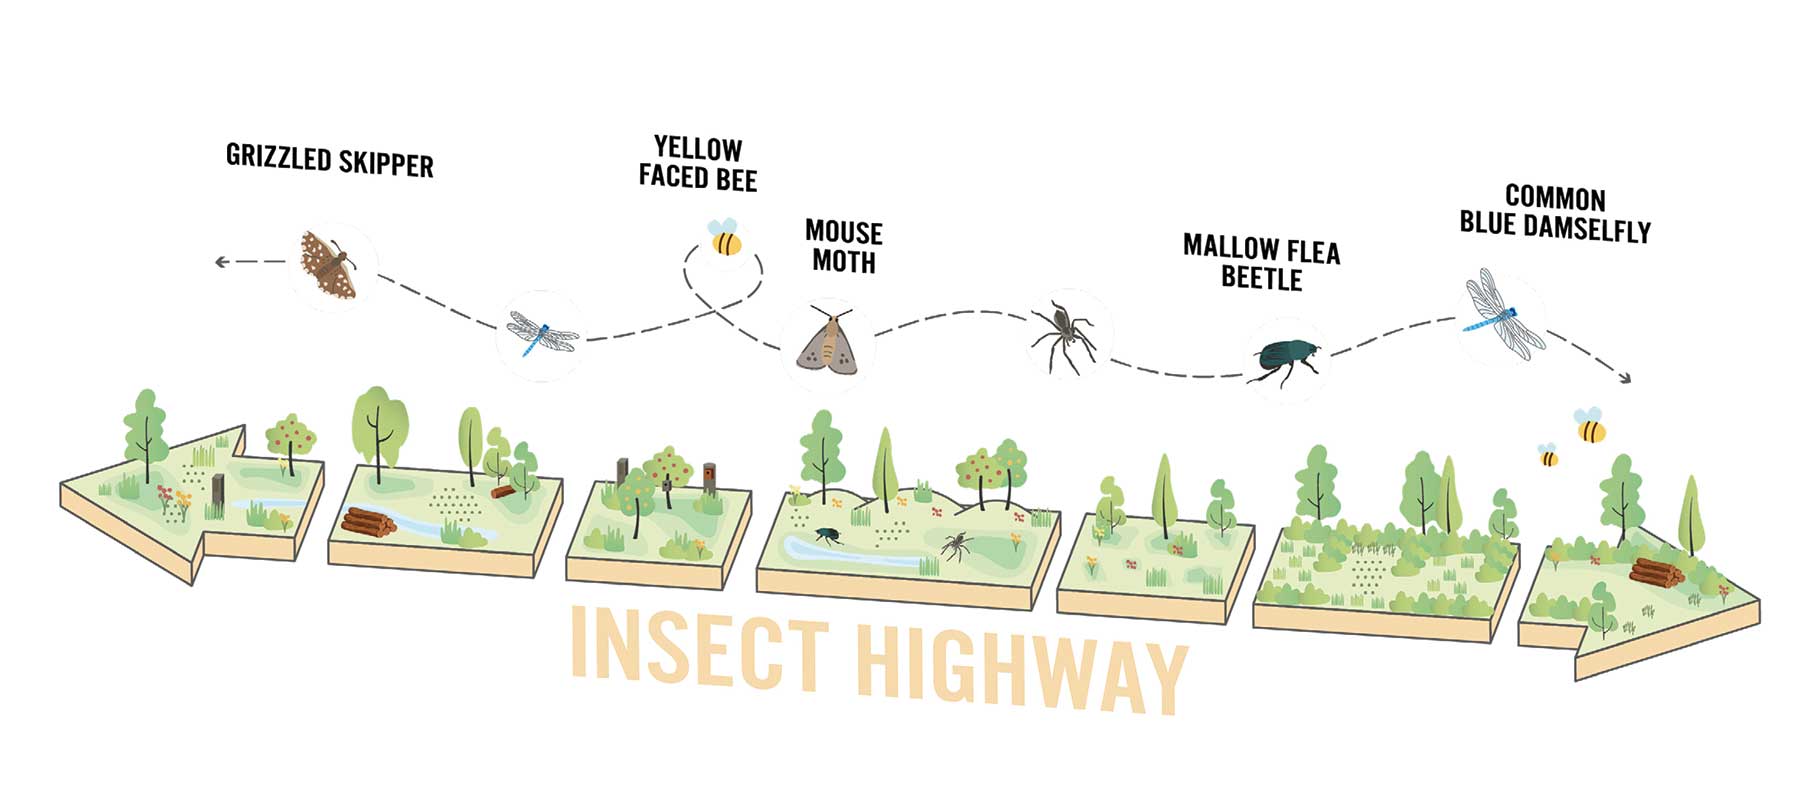 Insect highway